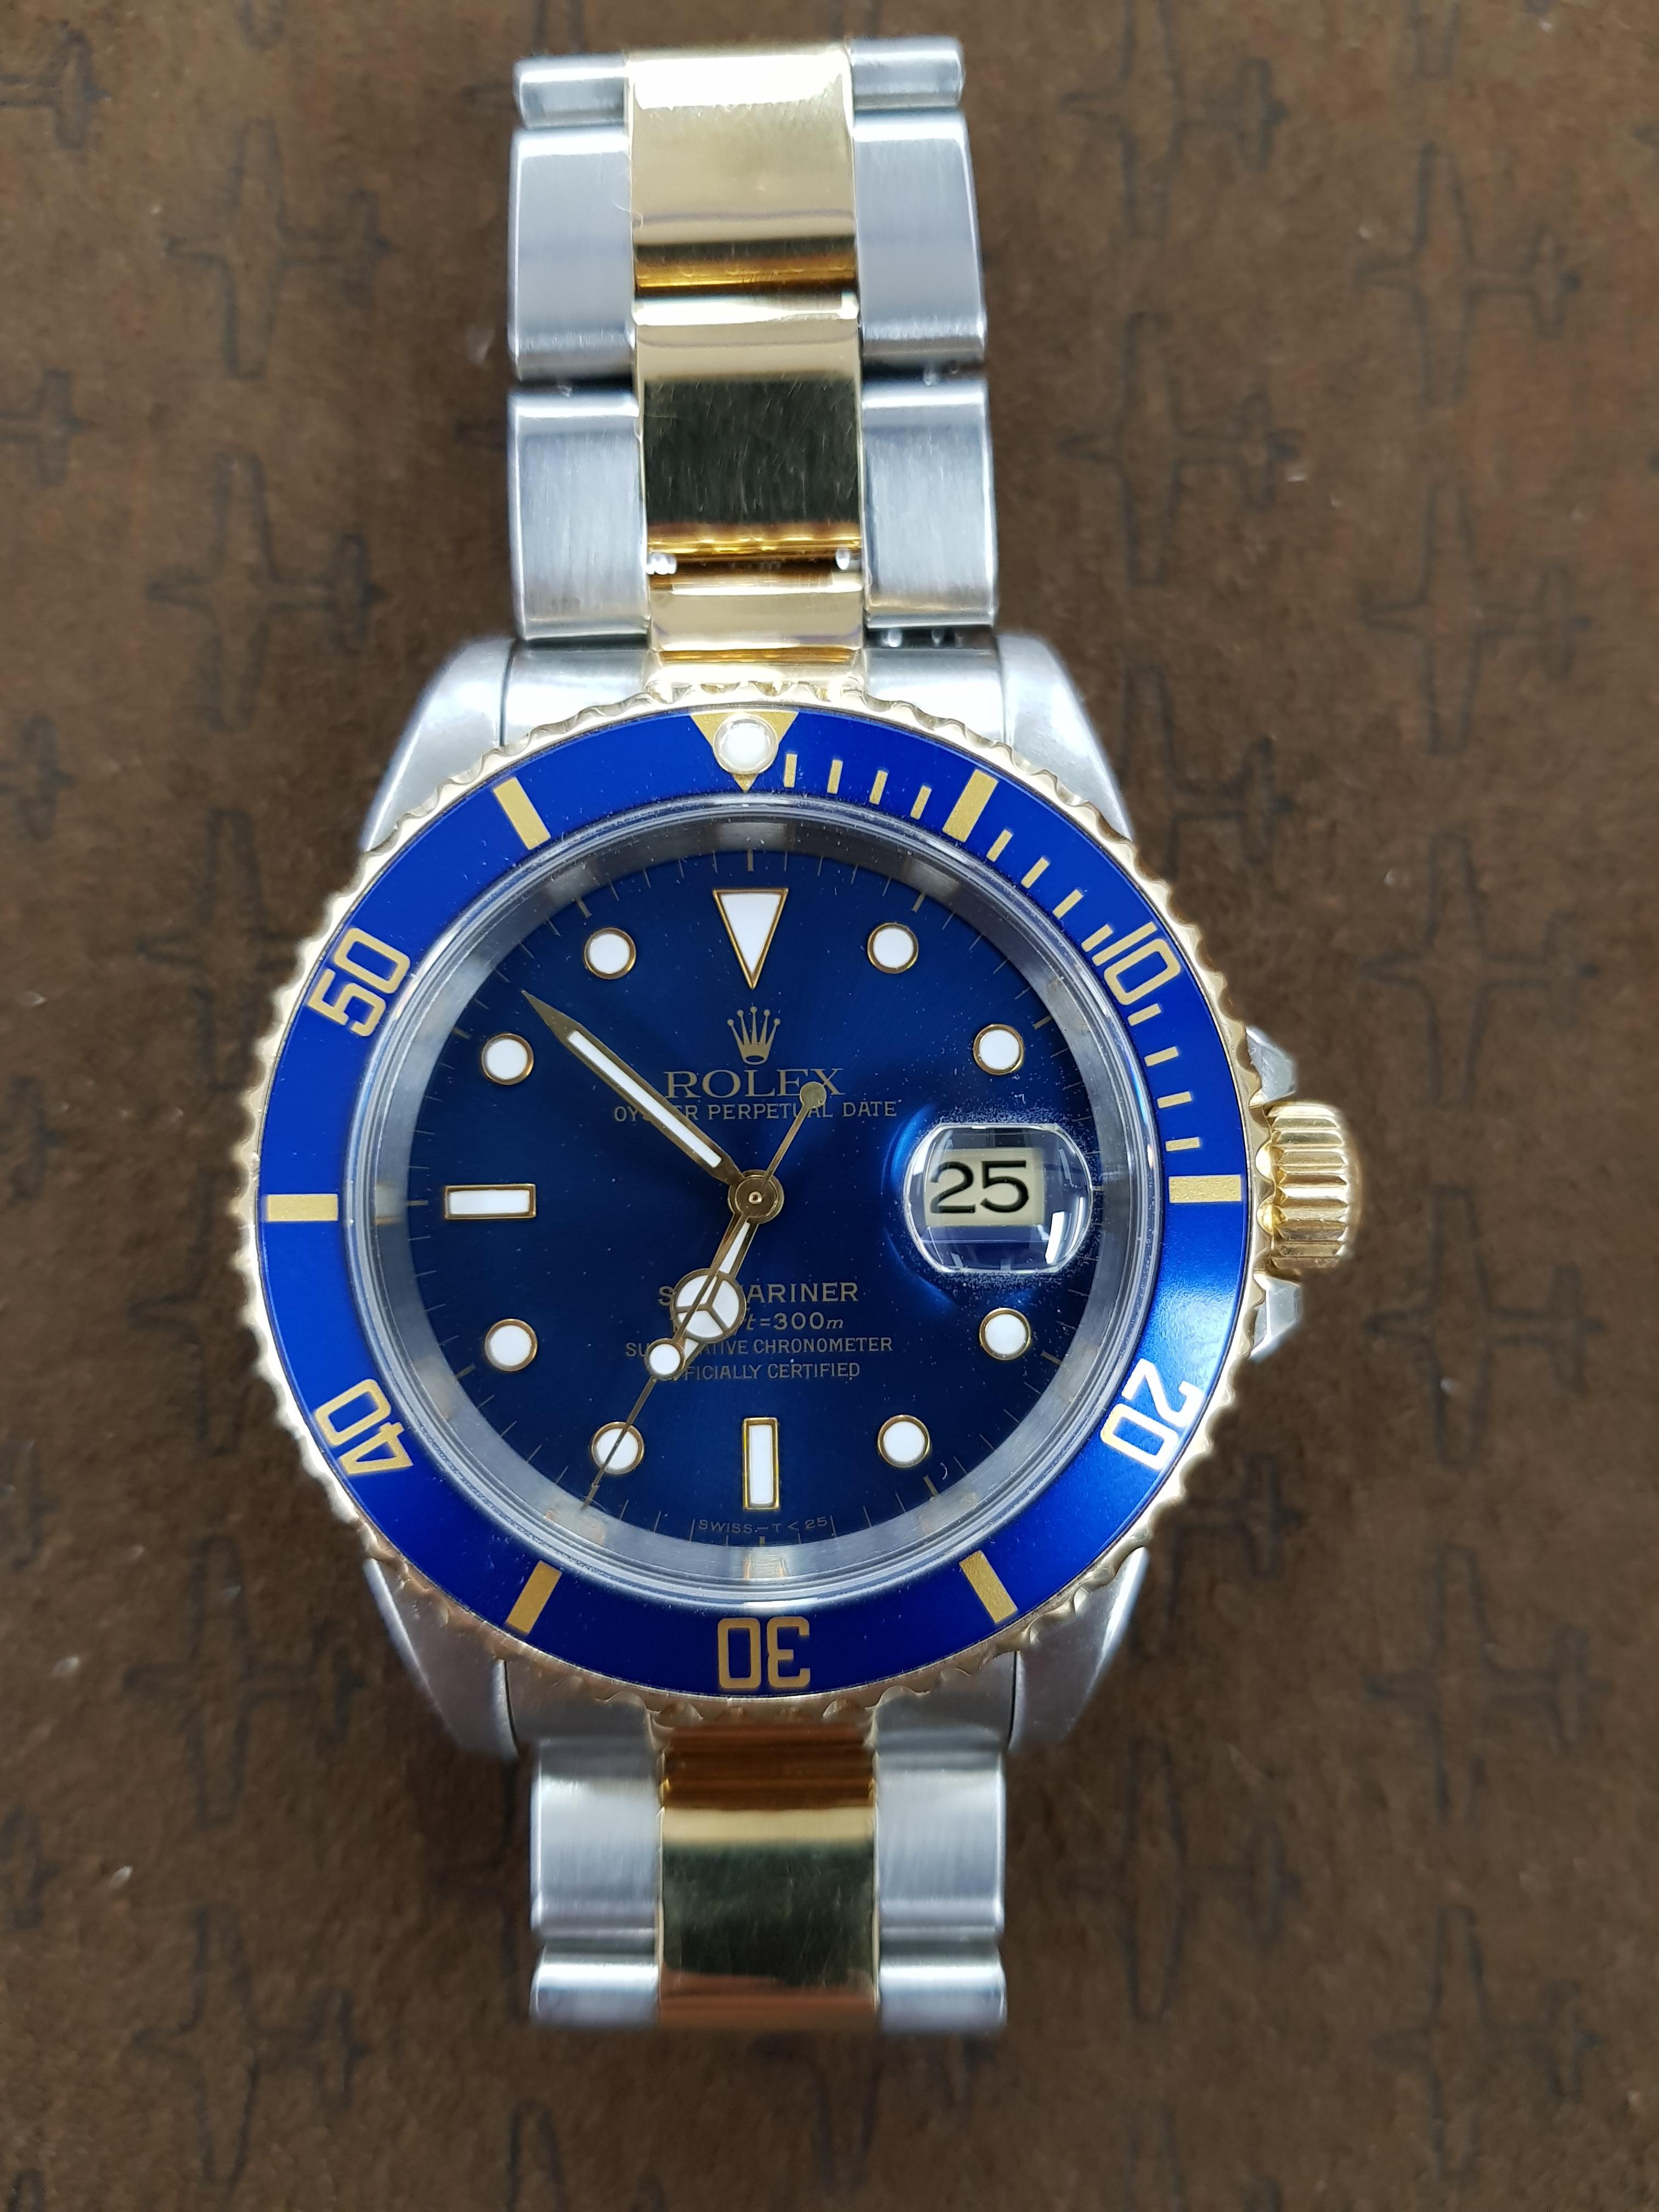 Bi-metal Rolex Submariner (pre ceramic) 40mm dial. Combines yellow gold with stainless steel. This watch comes with full Rolex certification.